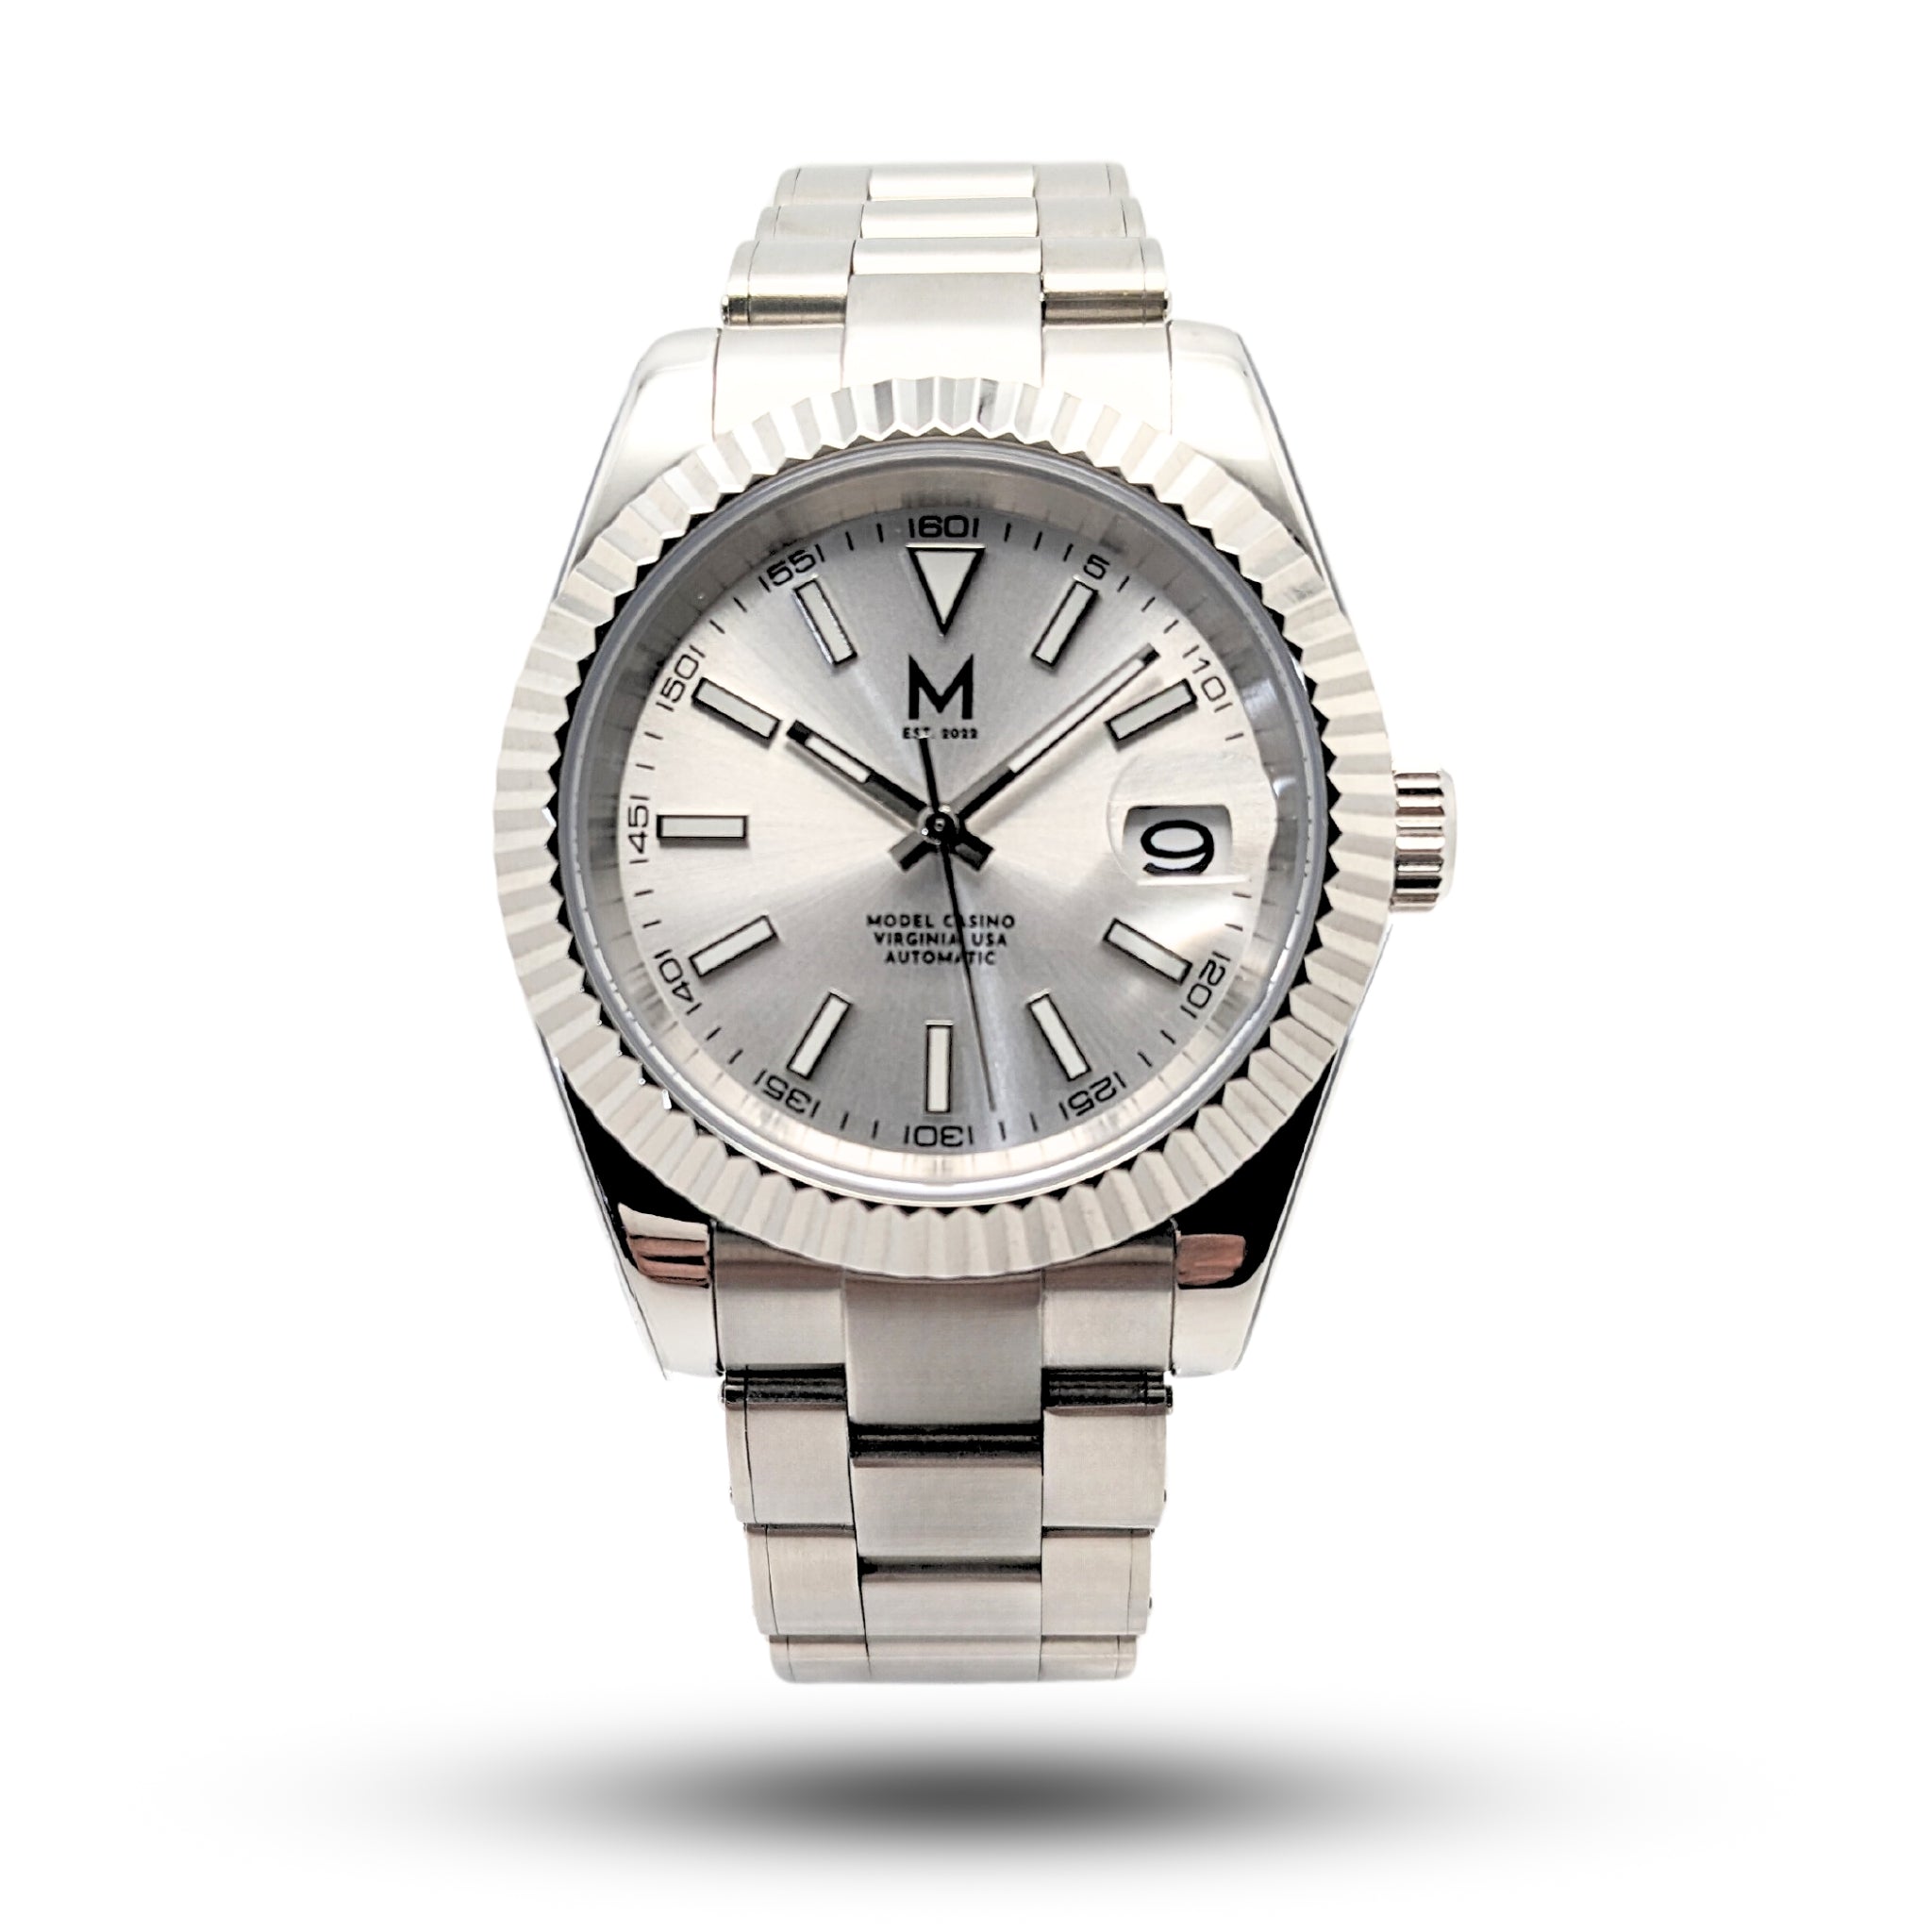 Purchase Coronet Diamond Watch-WCSA290SNSS online at Lifestyle Fine Jewelry.